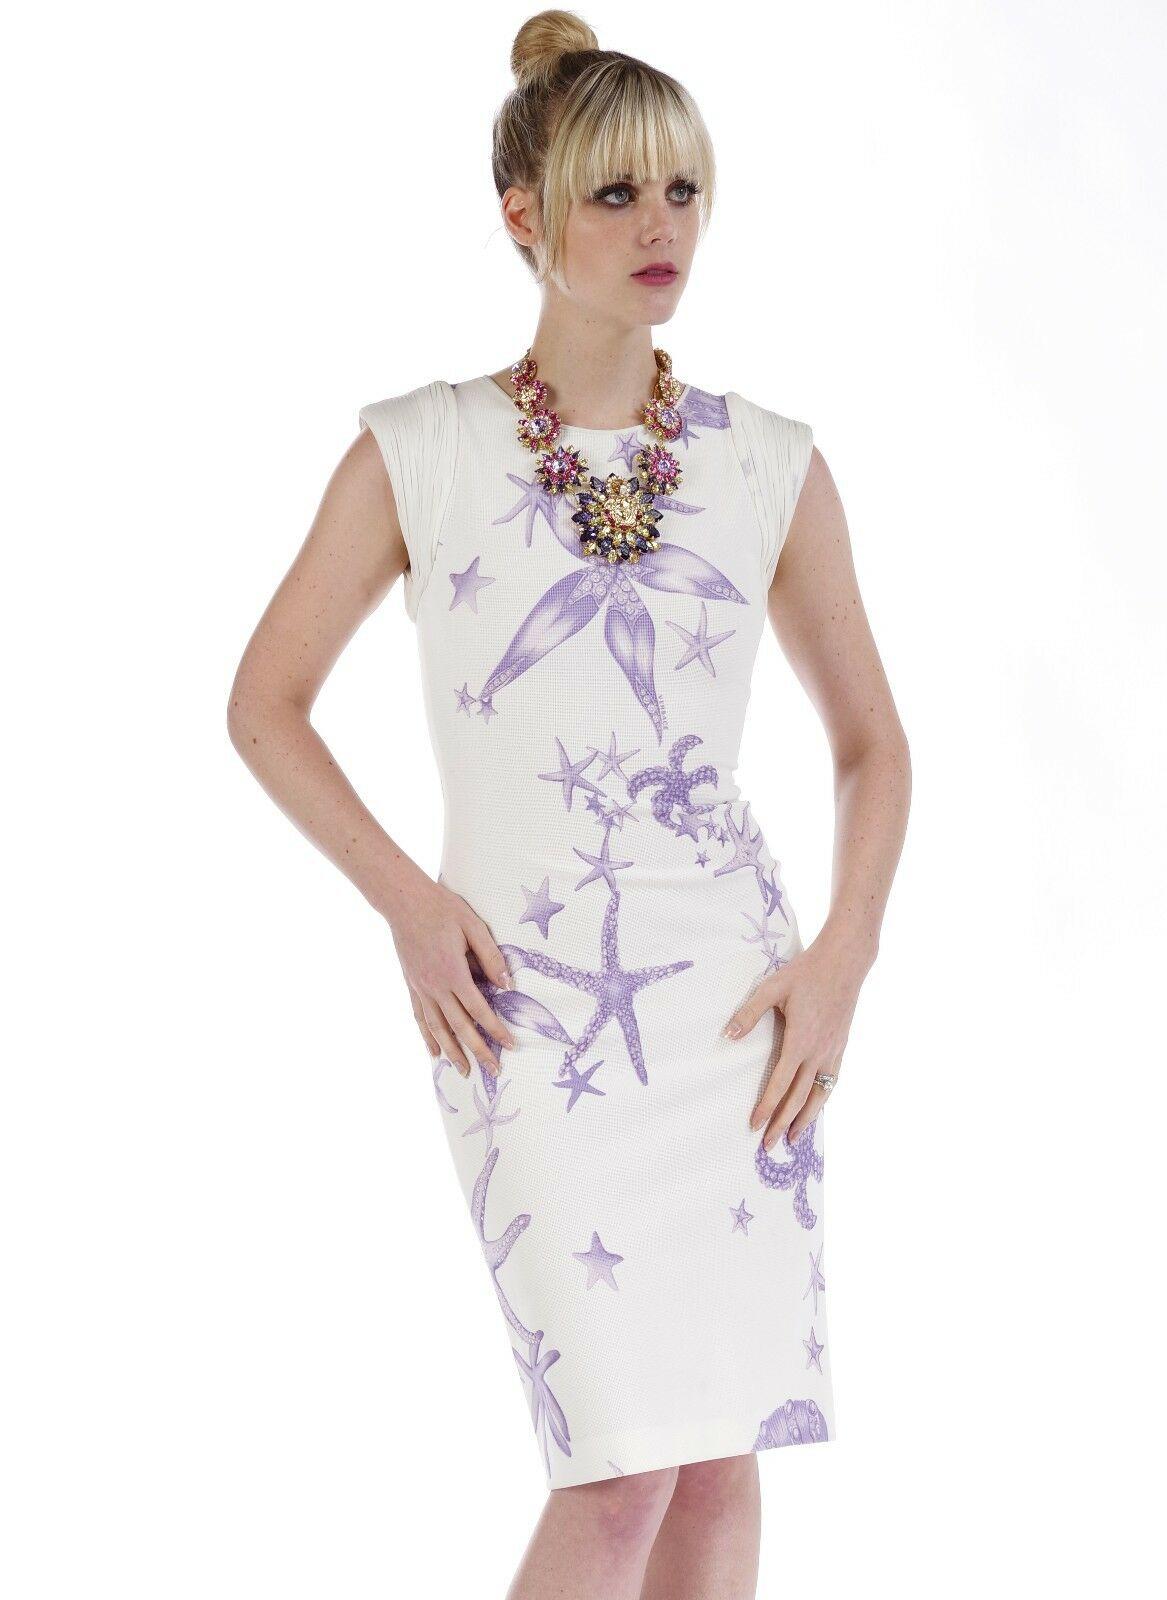 VERSACE

Starfish and seashell print dress. 

Unique sample.

Finished with plisse details on both shoulders and two way zip fastening on the back.

Shown with Versace Blooming Medusa necklace. Listed separately in our store.
 Size  38 - US